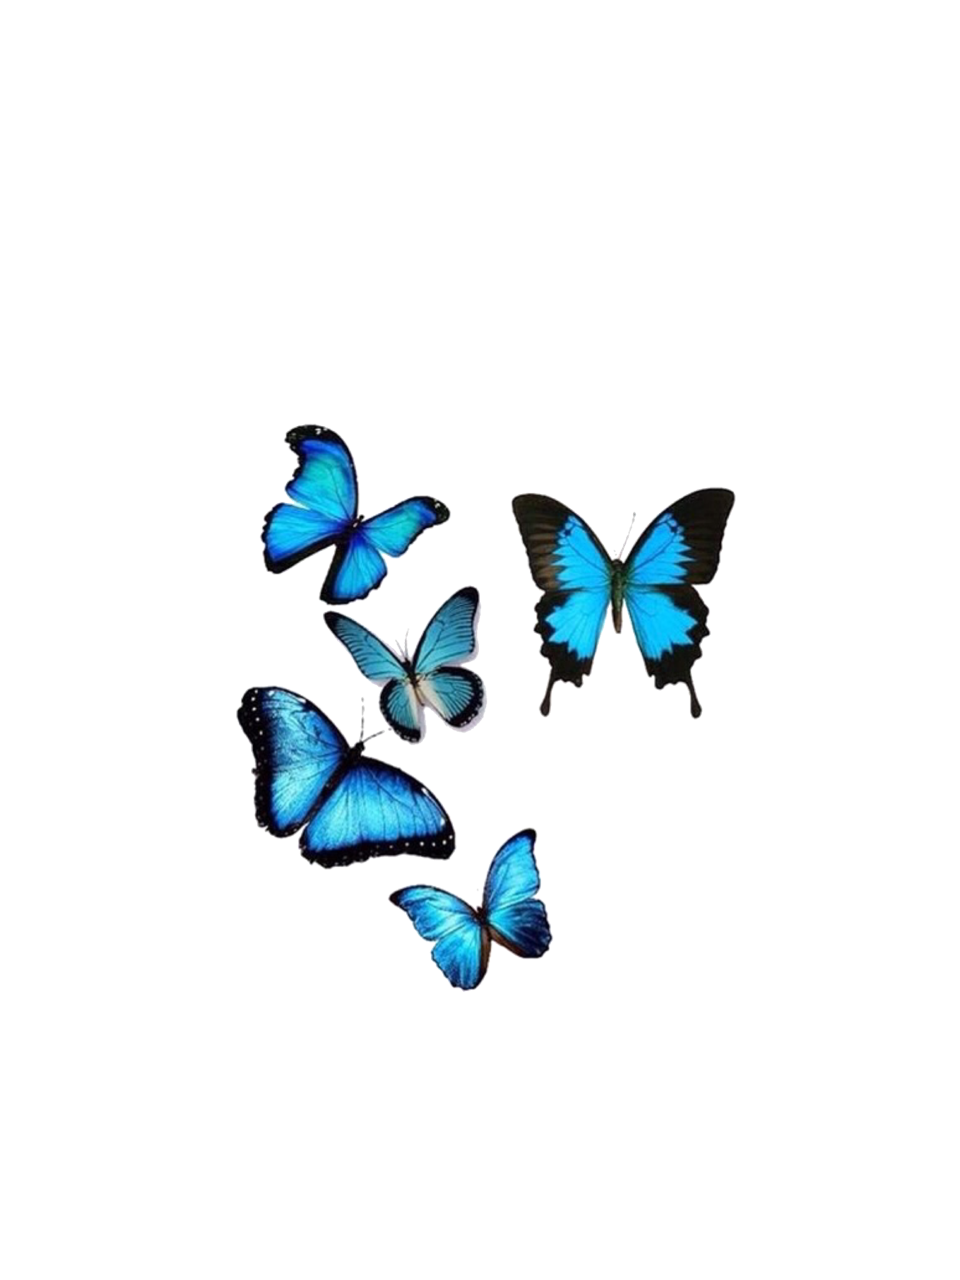 Butterflies PNG Images Transparent Background | PNG Play